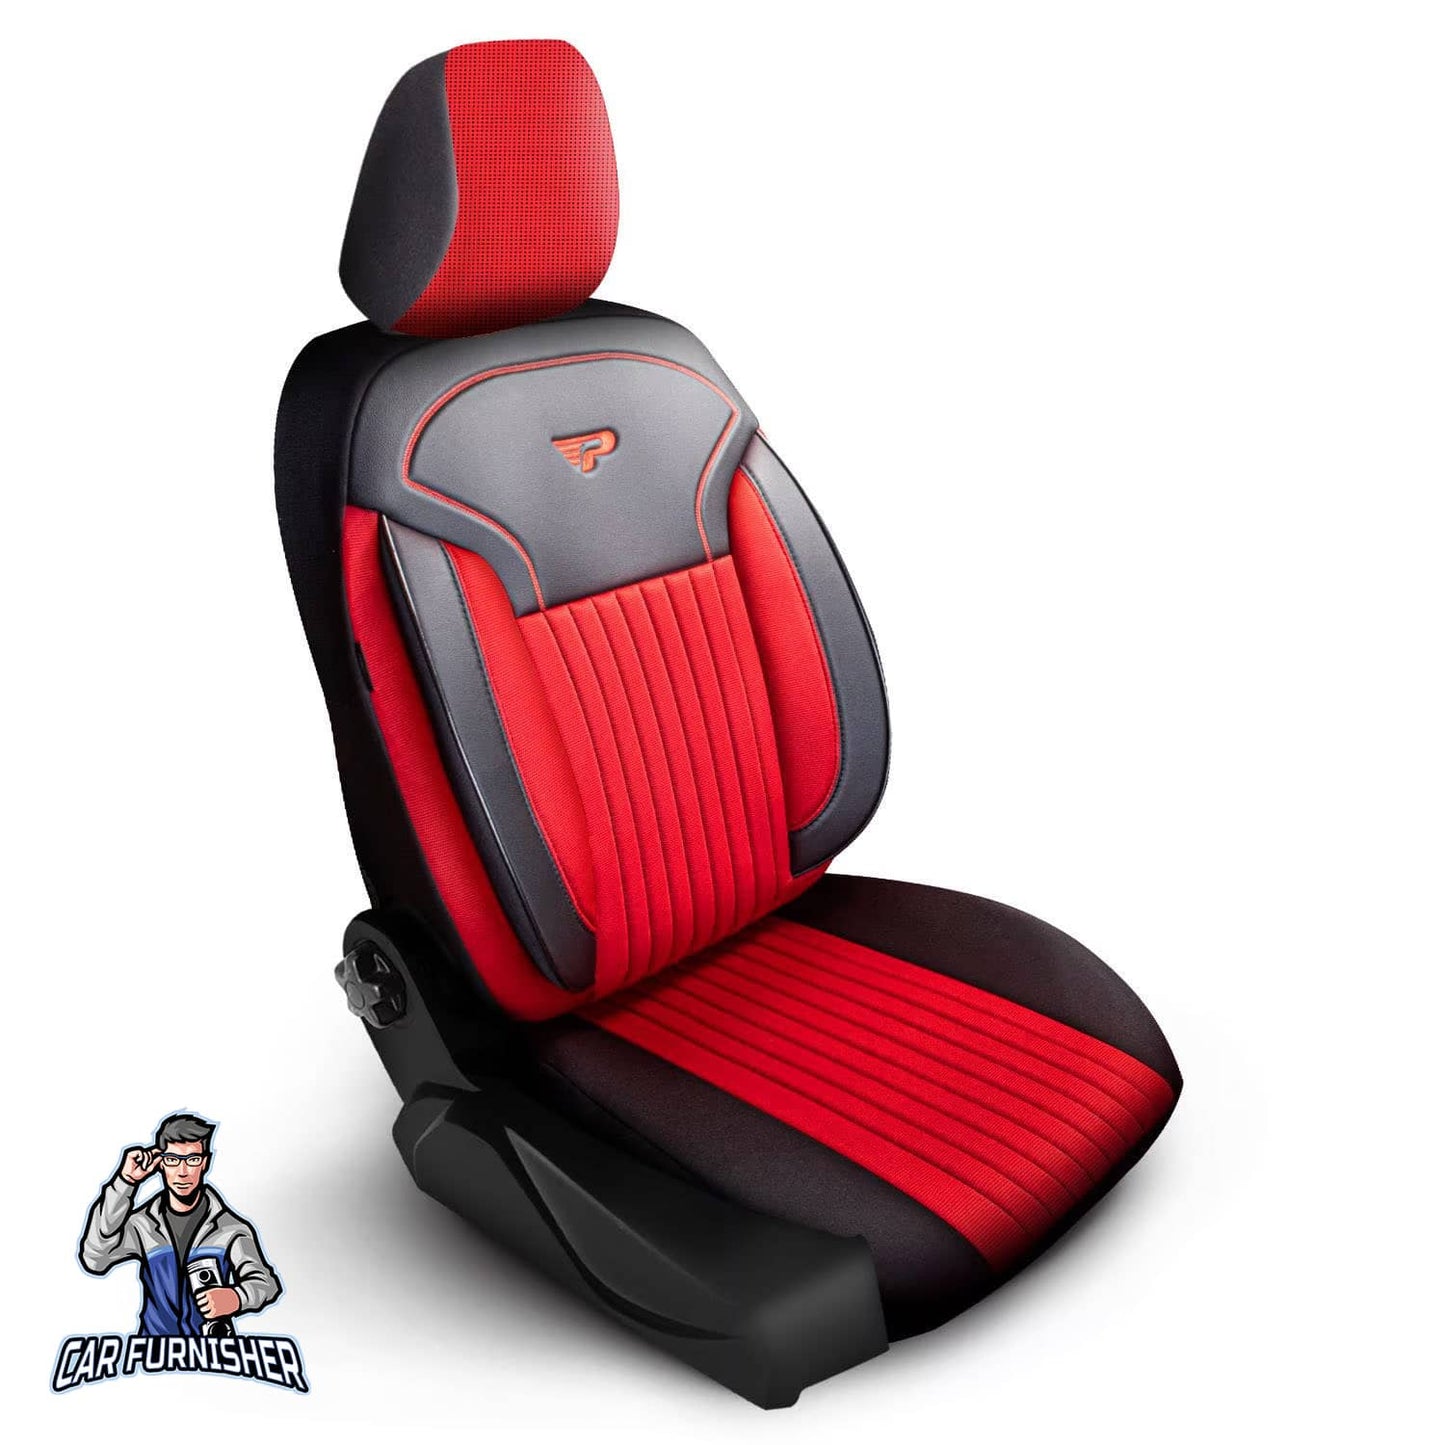 Mercedes 190 Seat Covers Prague Design Red 5 Seats + Headrests (Full Set) Leather & Pique Fabric